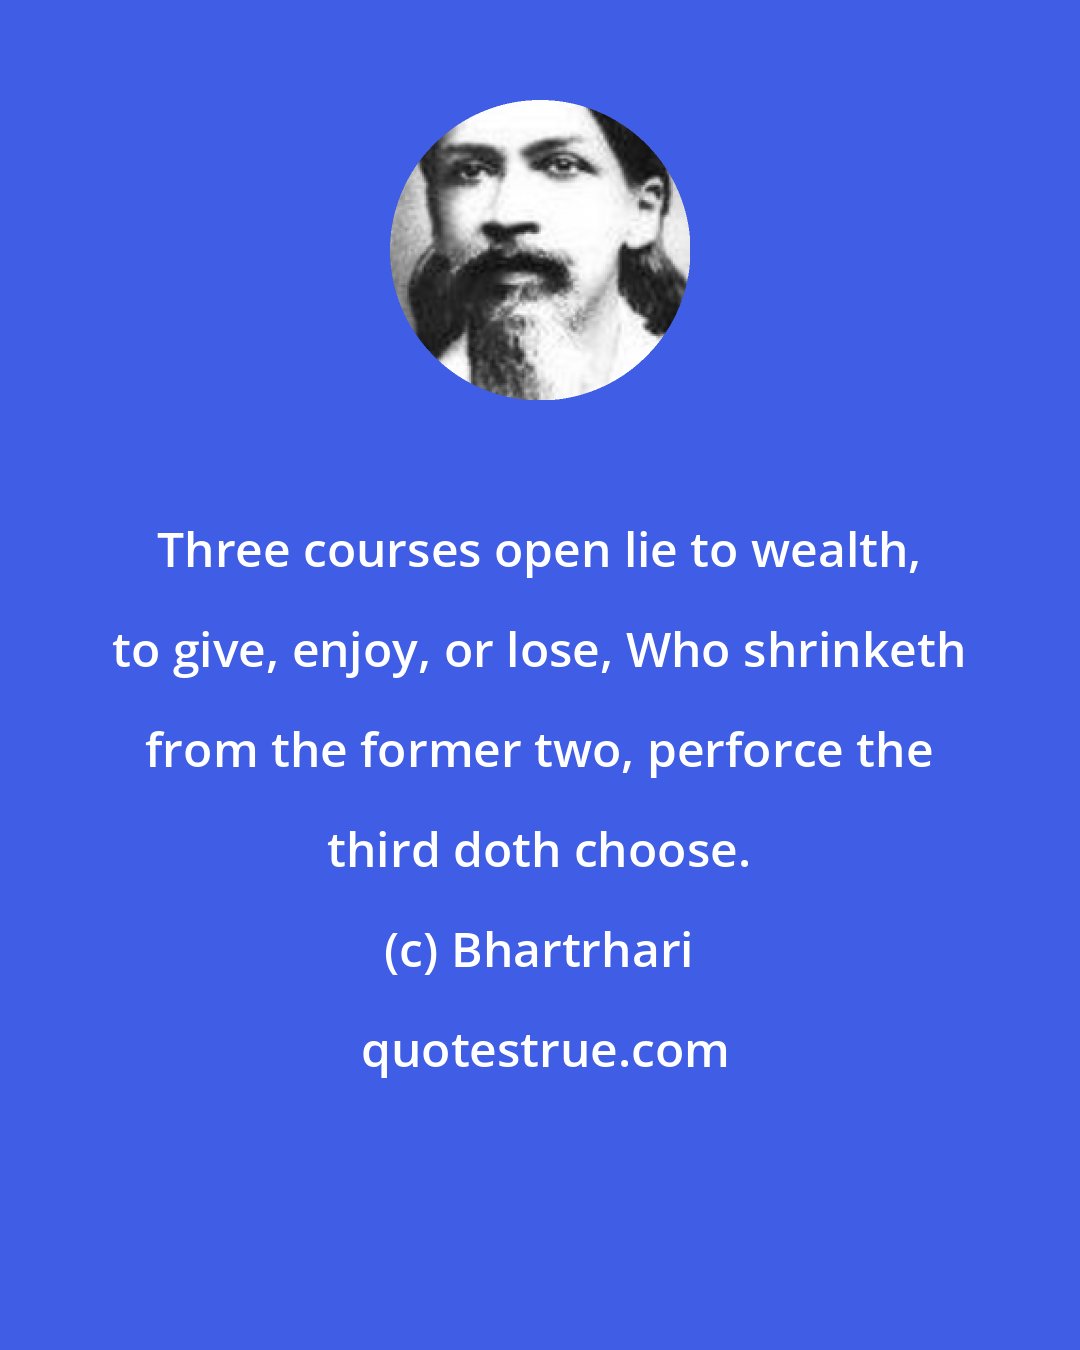 Bhartrhari: Three courses open lie to wealth, to give, enjoy, or lose, Who shrinketh from the former two, perforce the third doth choose.